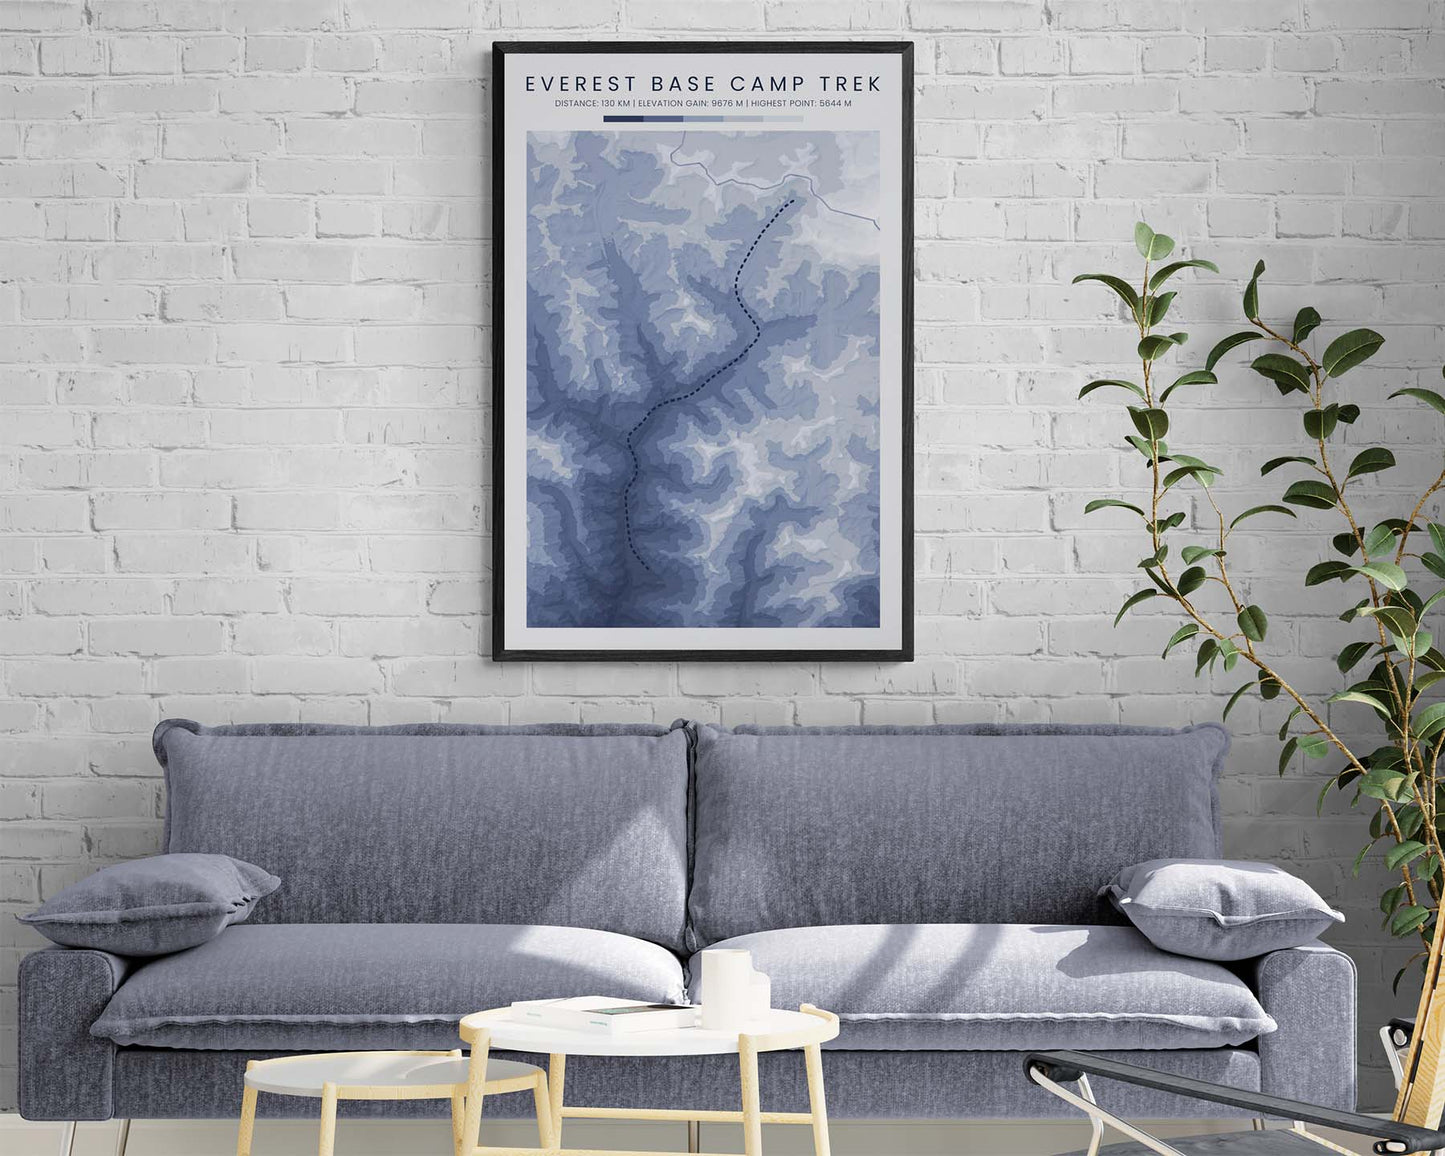 Mount Everest Trek (Nepal) Route Print with Contour Map in Modern Room Decor